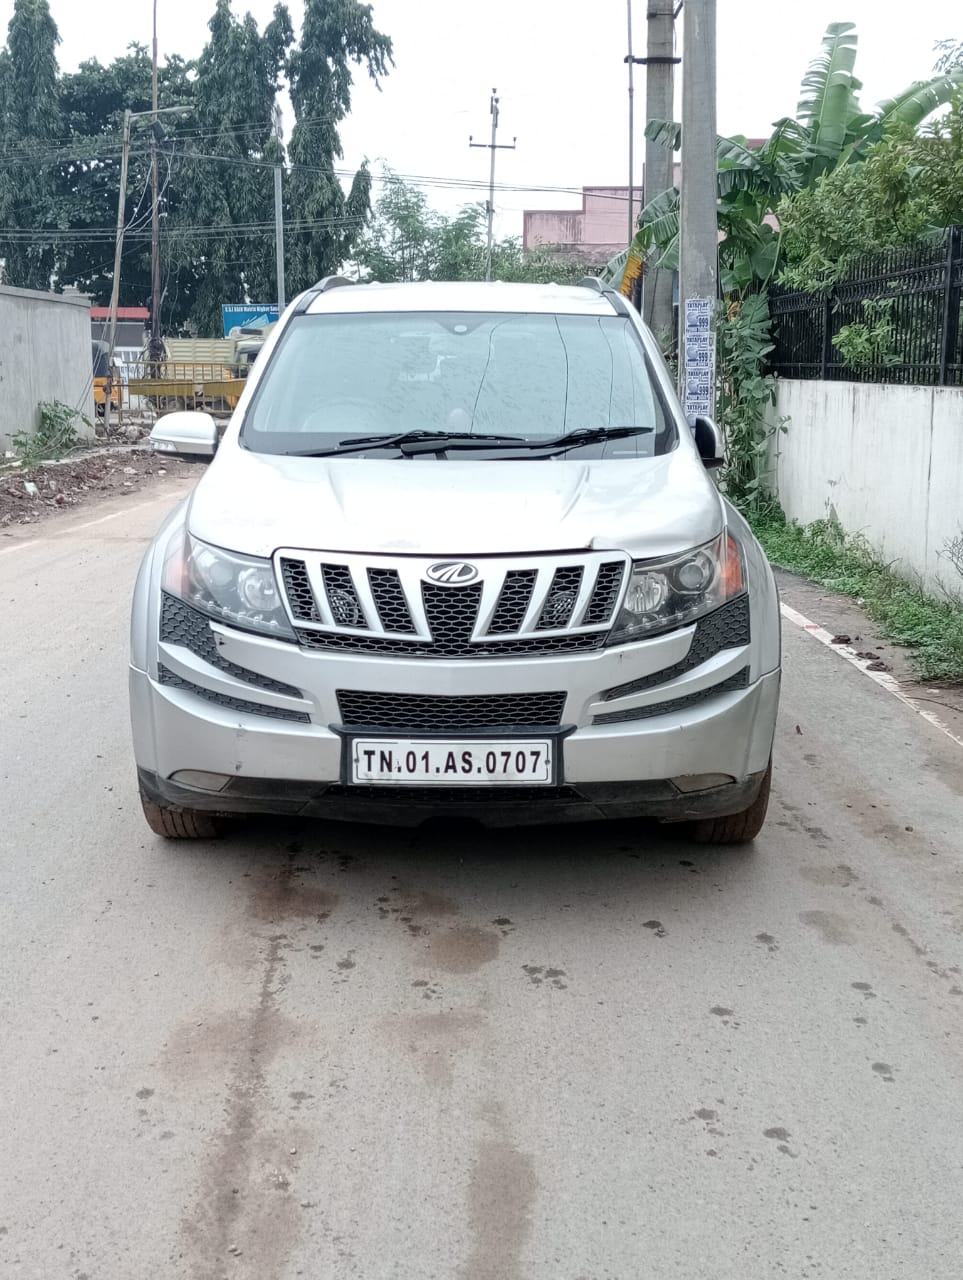 5046-for-sale-Mahindra-XUV-500-Diesel-First-Owner-2012-PY-registered-rs-549999